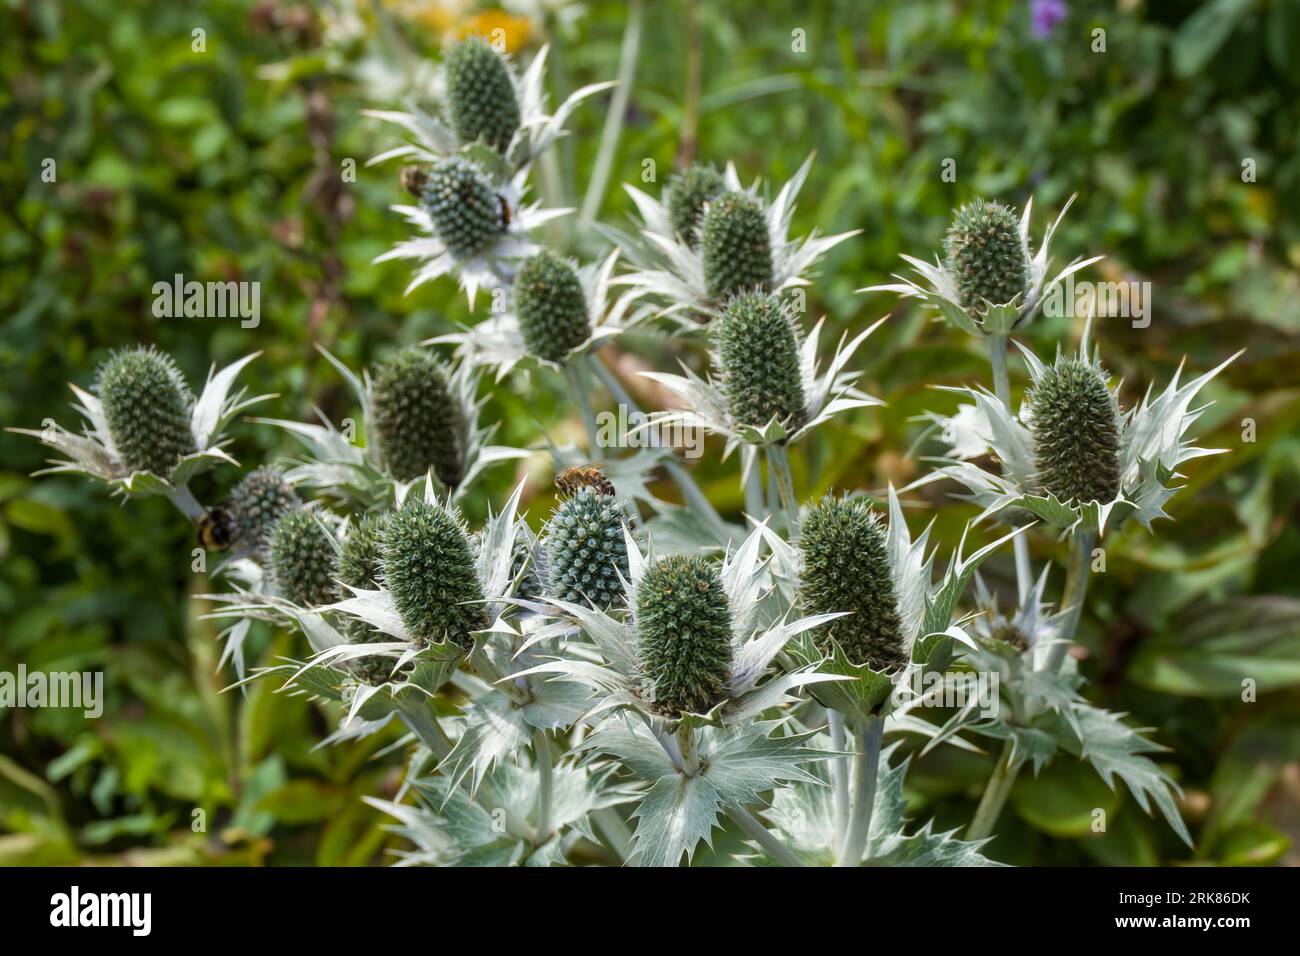 Eryngiums also known as sea holly with spiny leaves and a characteristic ruff around the flowerheads Stock Photo